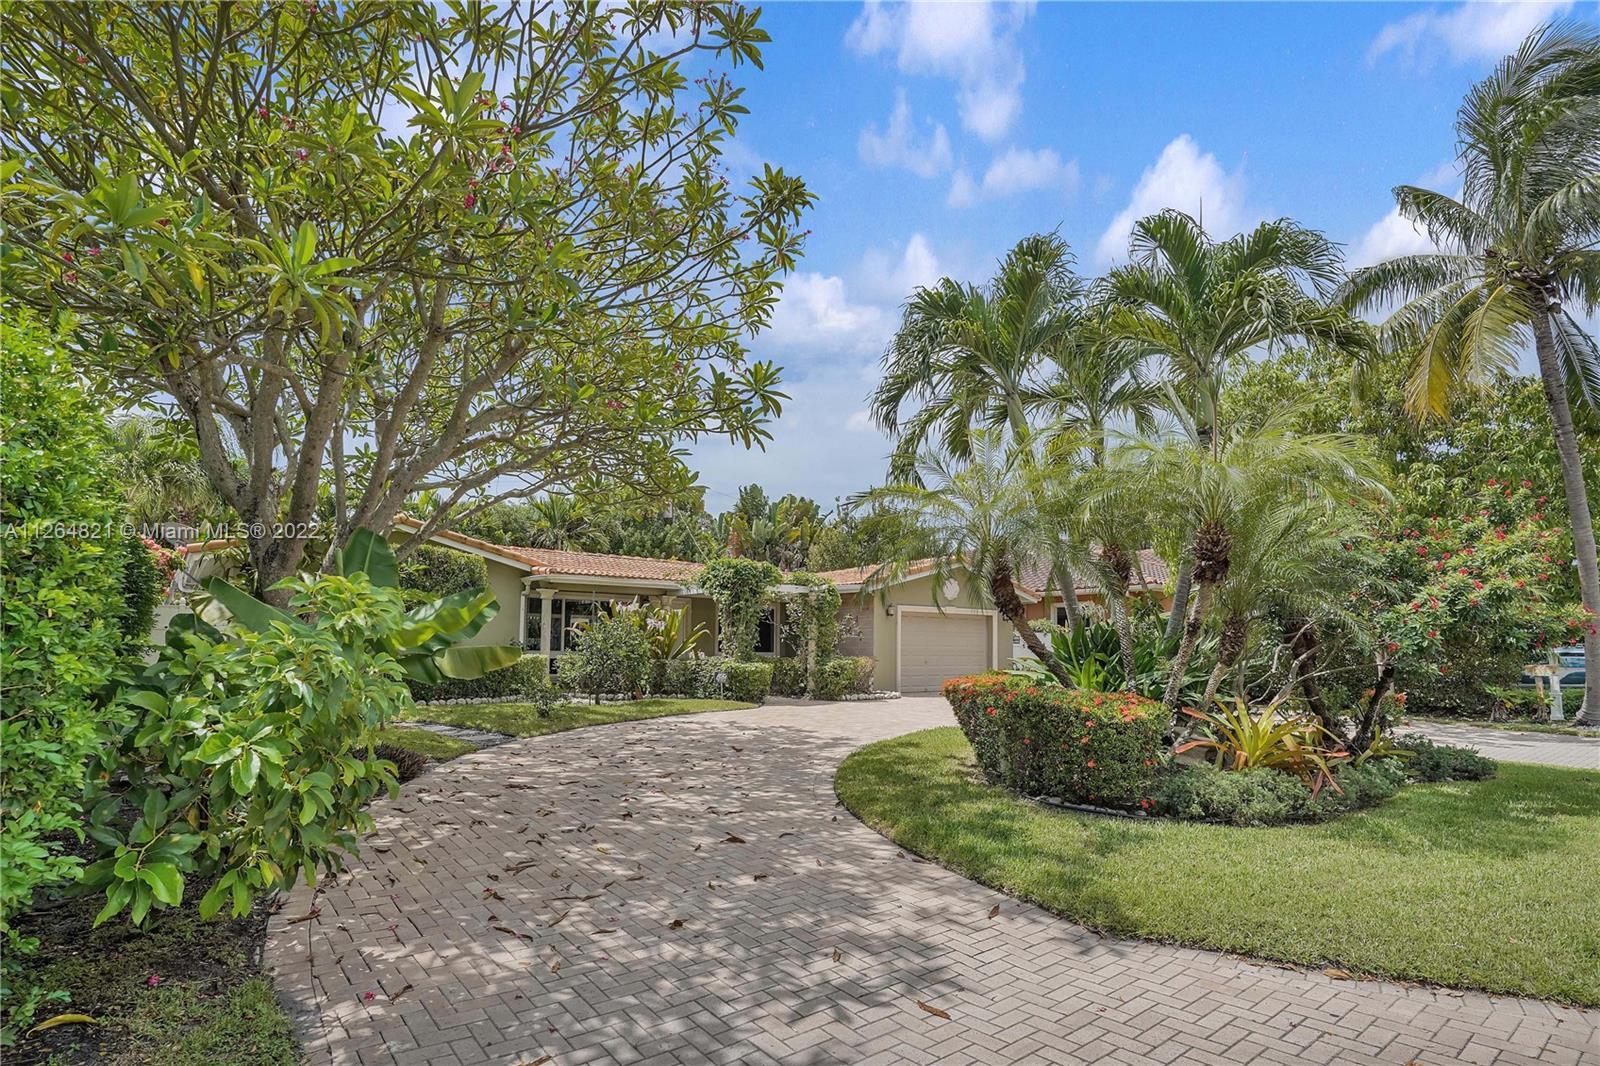 BEAUTIFUL MOVE IN READY BEACHSIDE HOME WITH WELCOMING GARDENS. THIS 3/2 UPDATED HOME HAS IT ALL. WIN